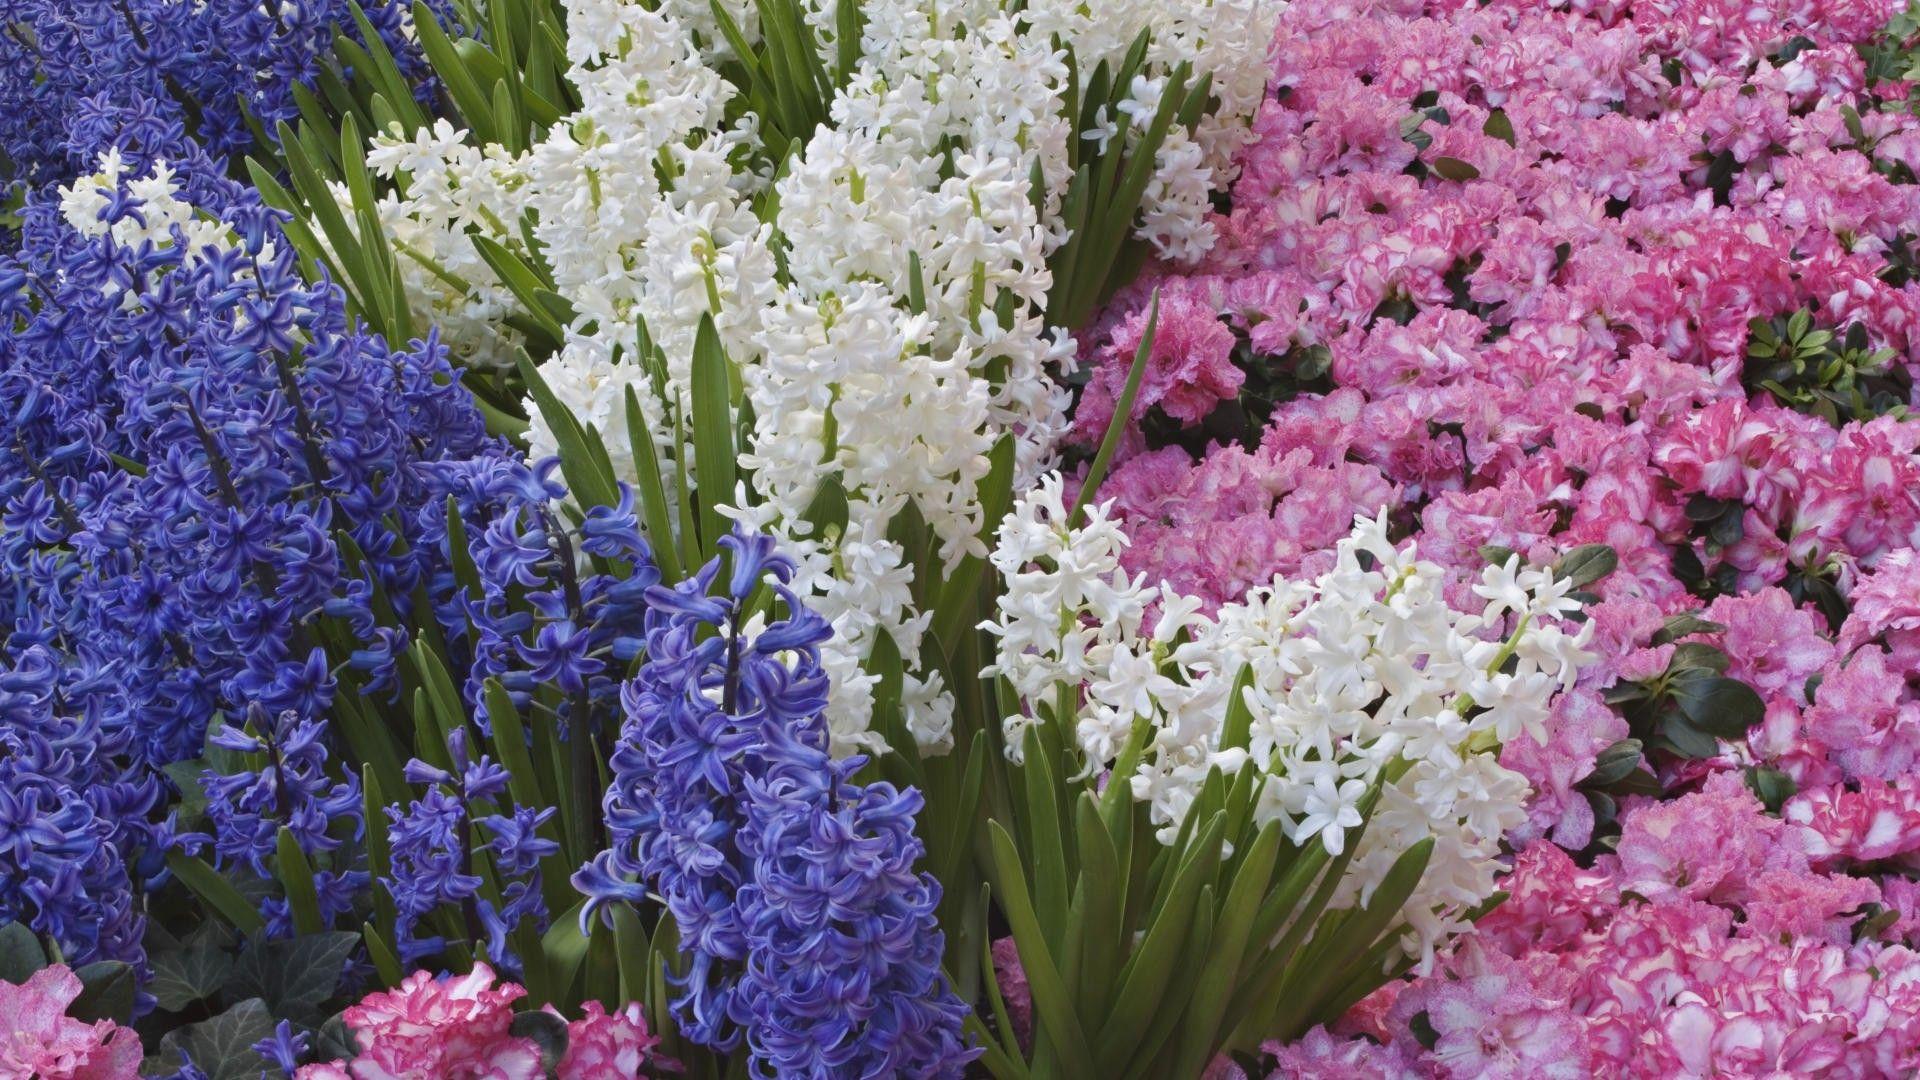 Download Wallpaper 1920x1080 hyacinths, flowers, spring, bed